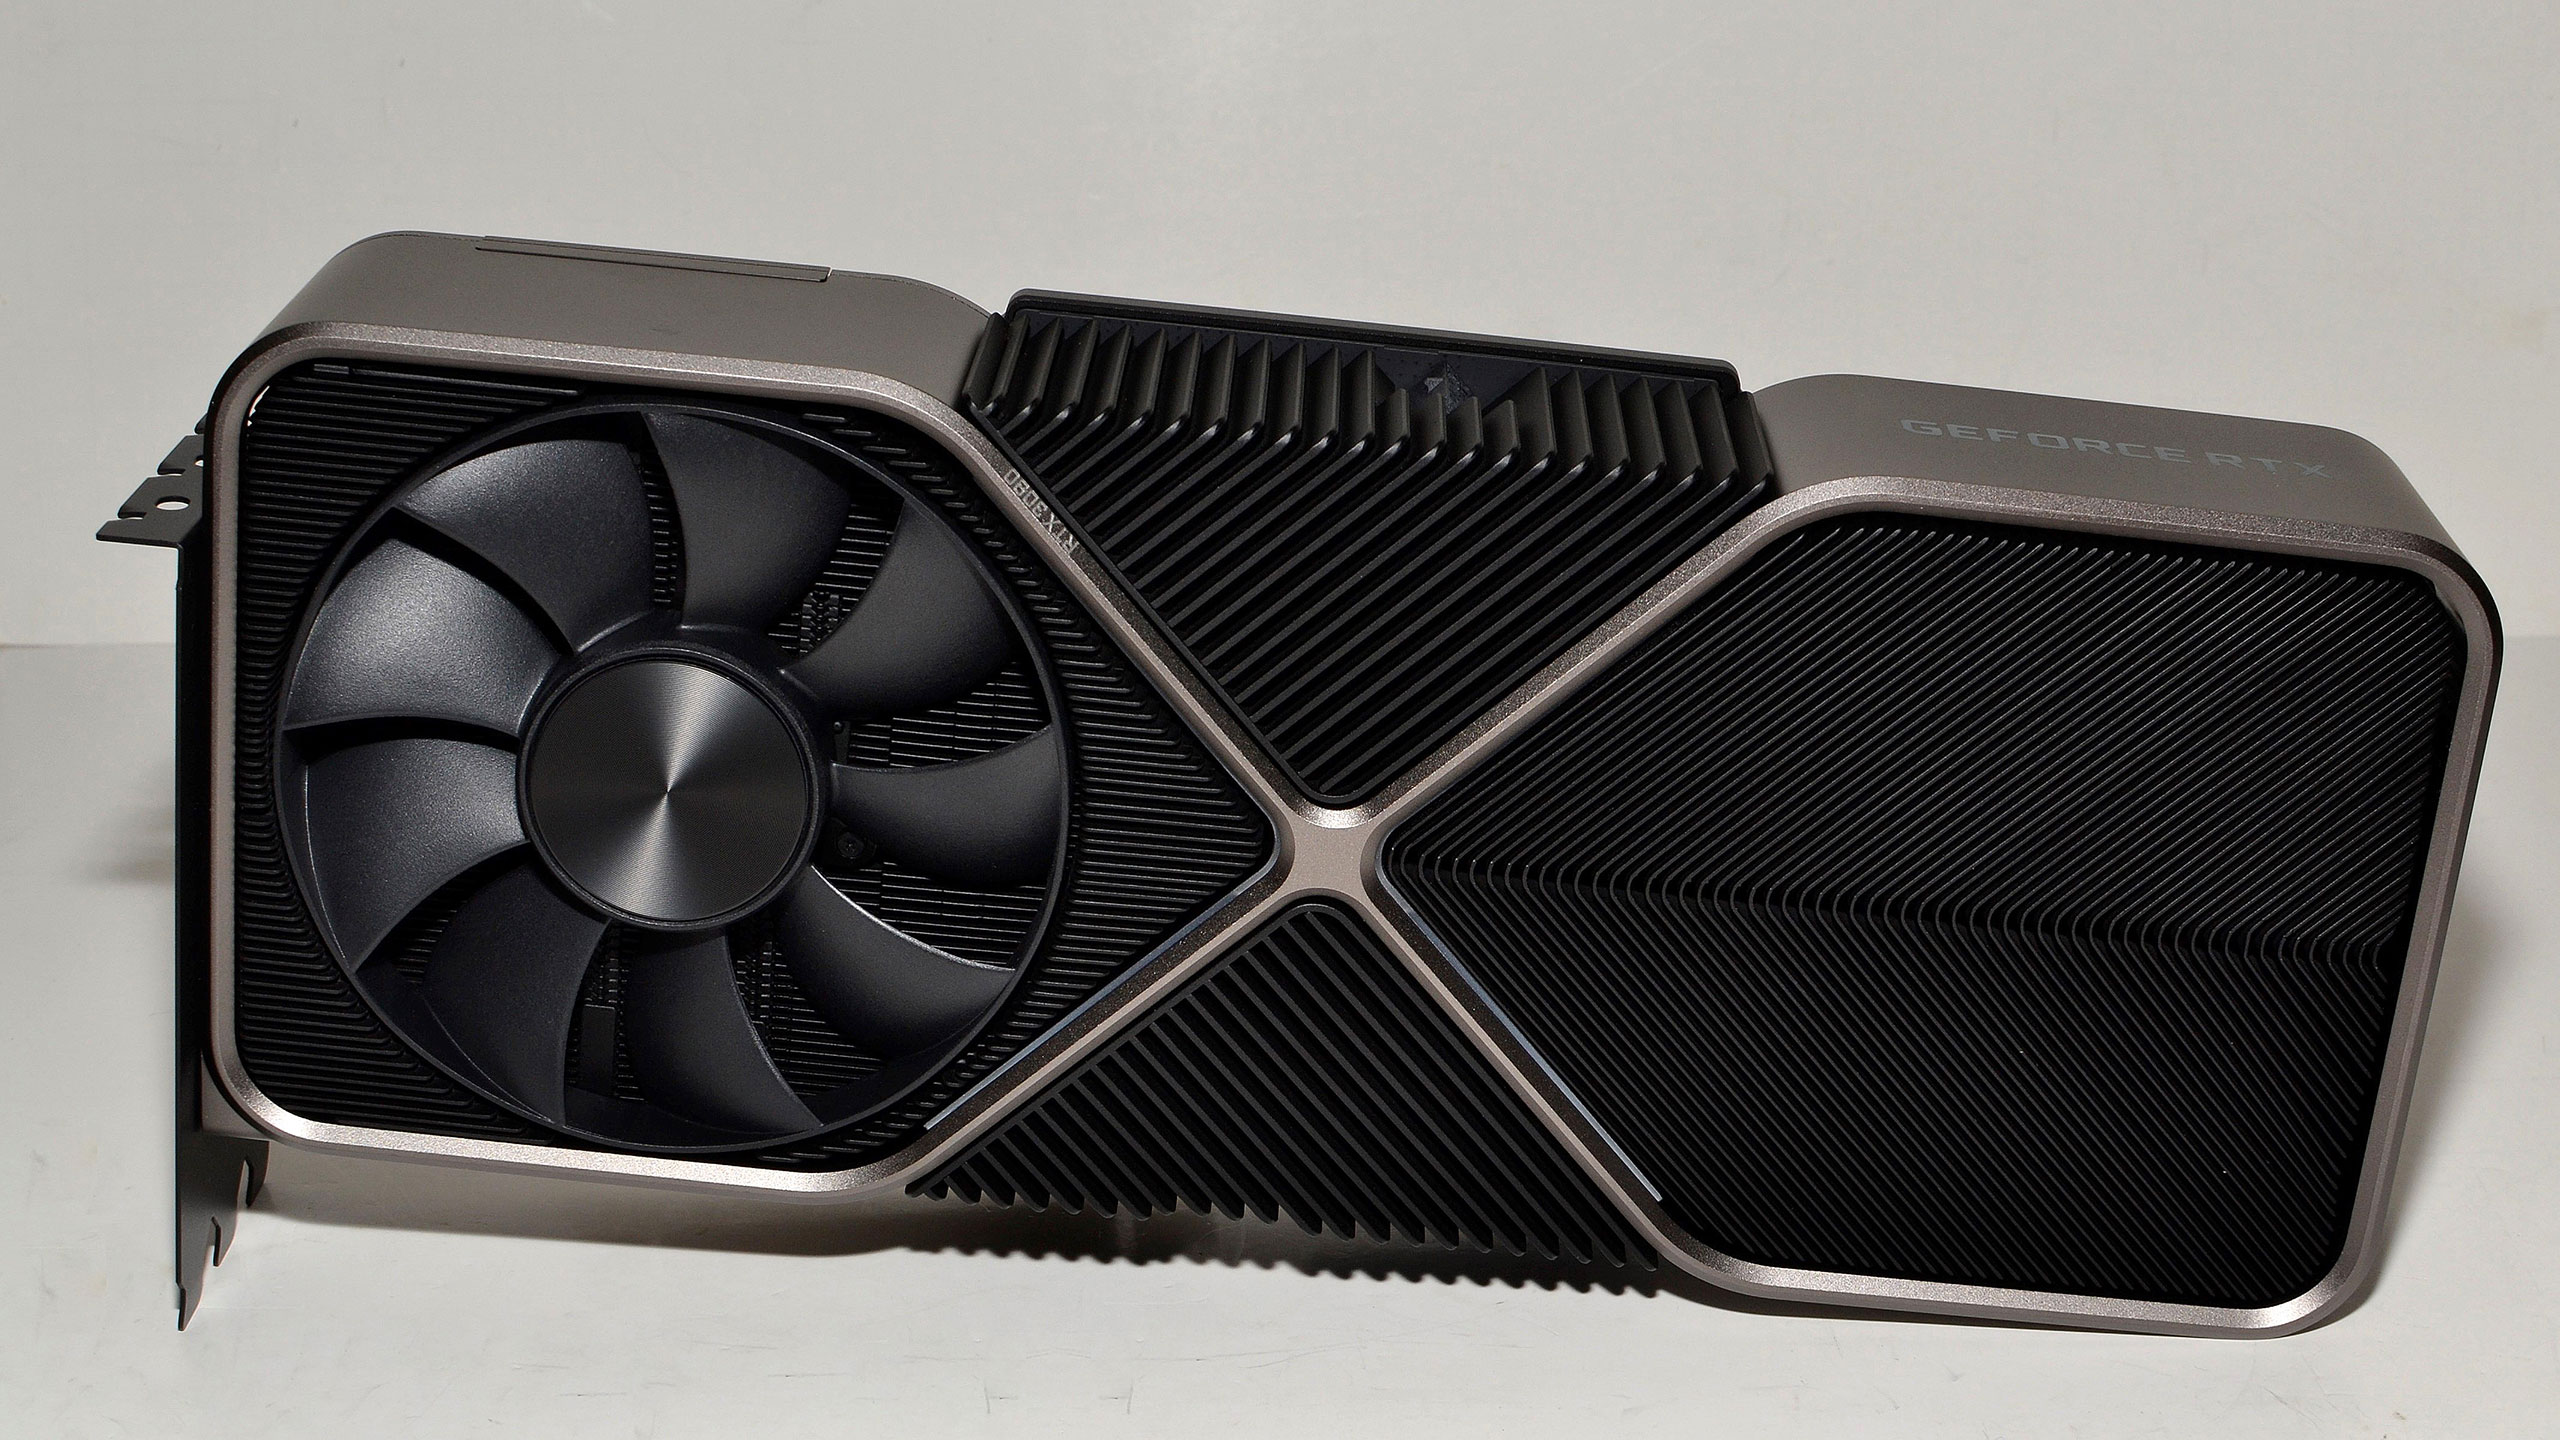 nvidia-geforce-rtx-3090-founders-edition-review:-heir-to-the-titan-throne